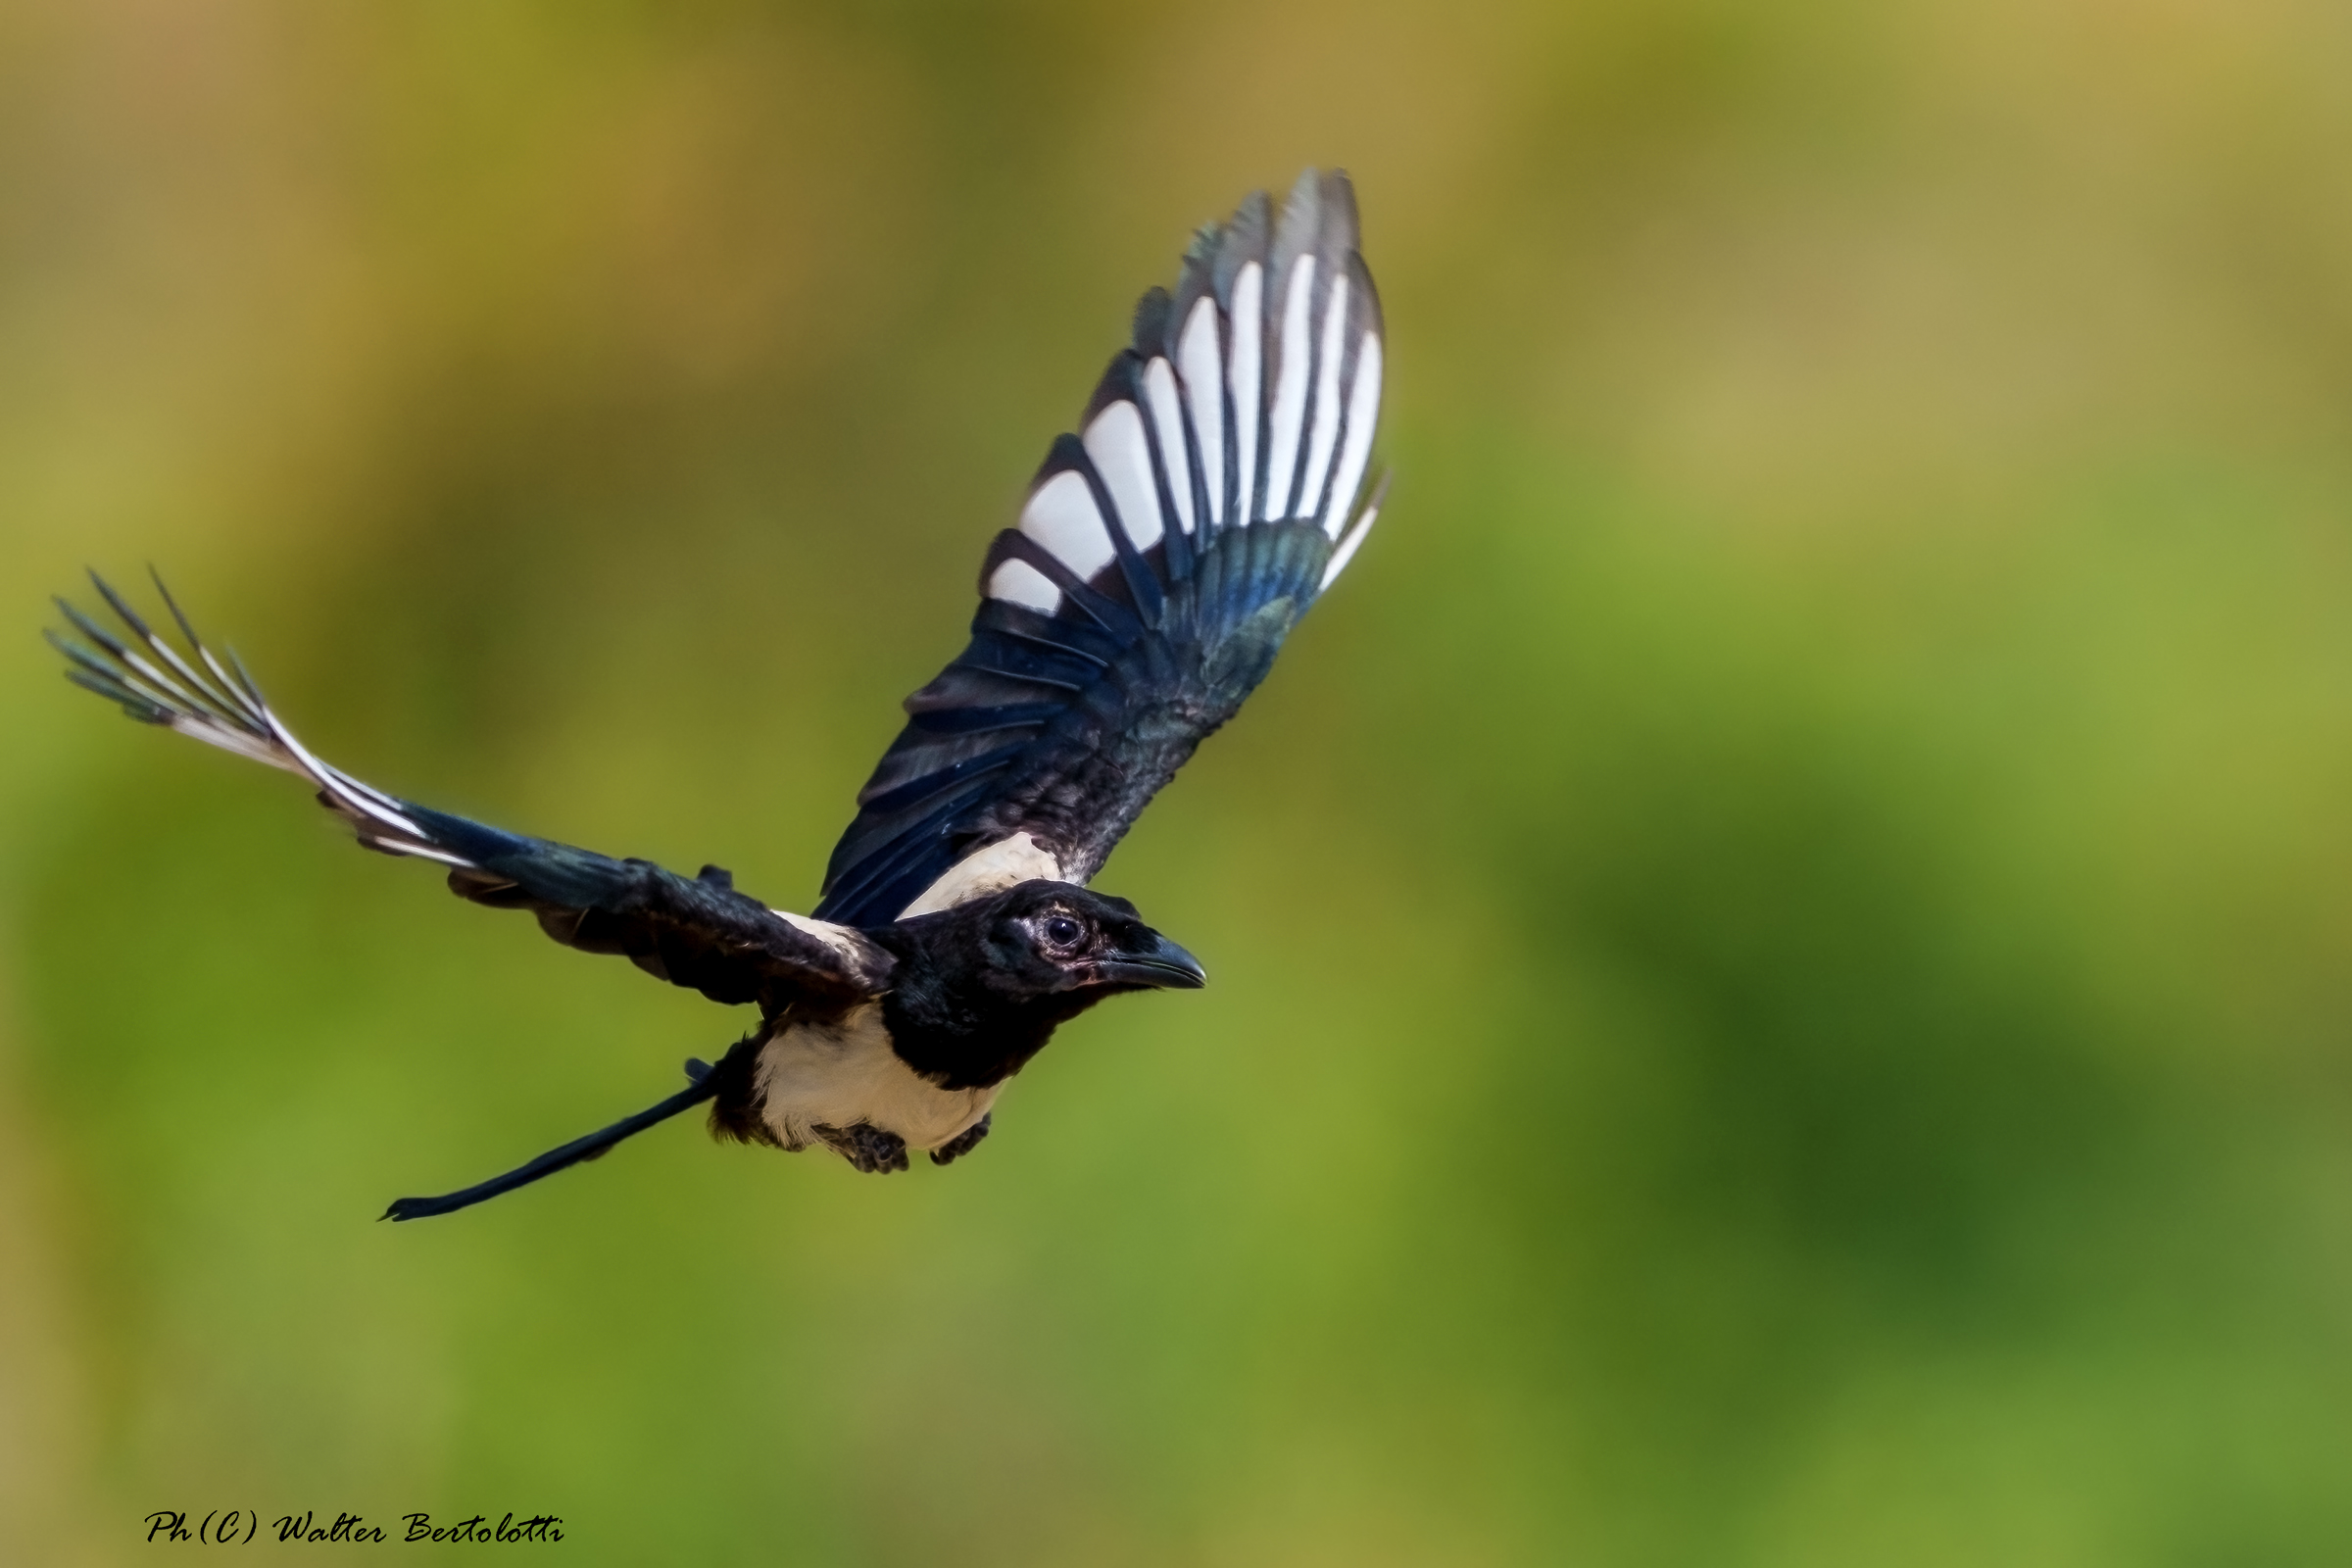 the flight of the magpie...